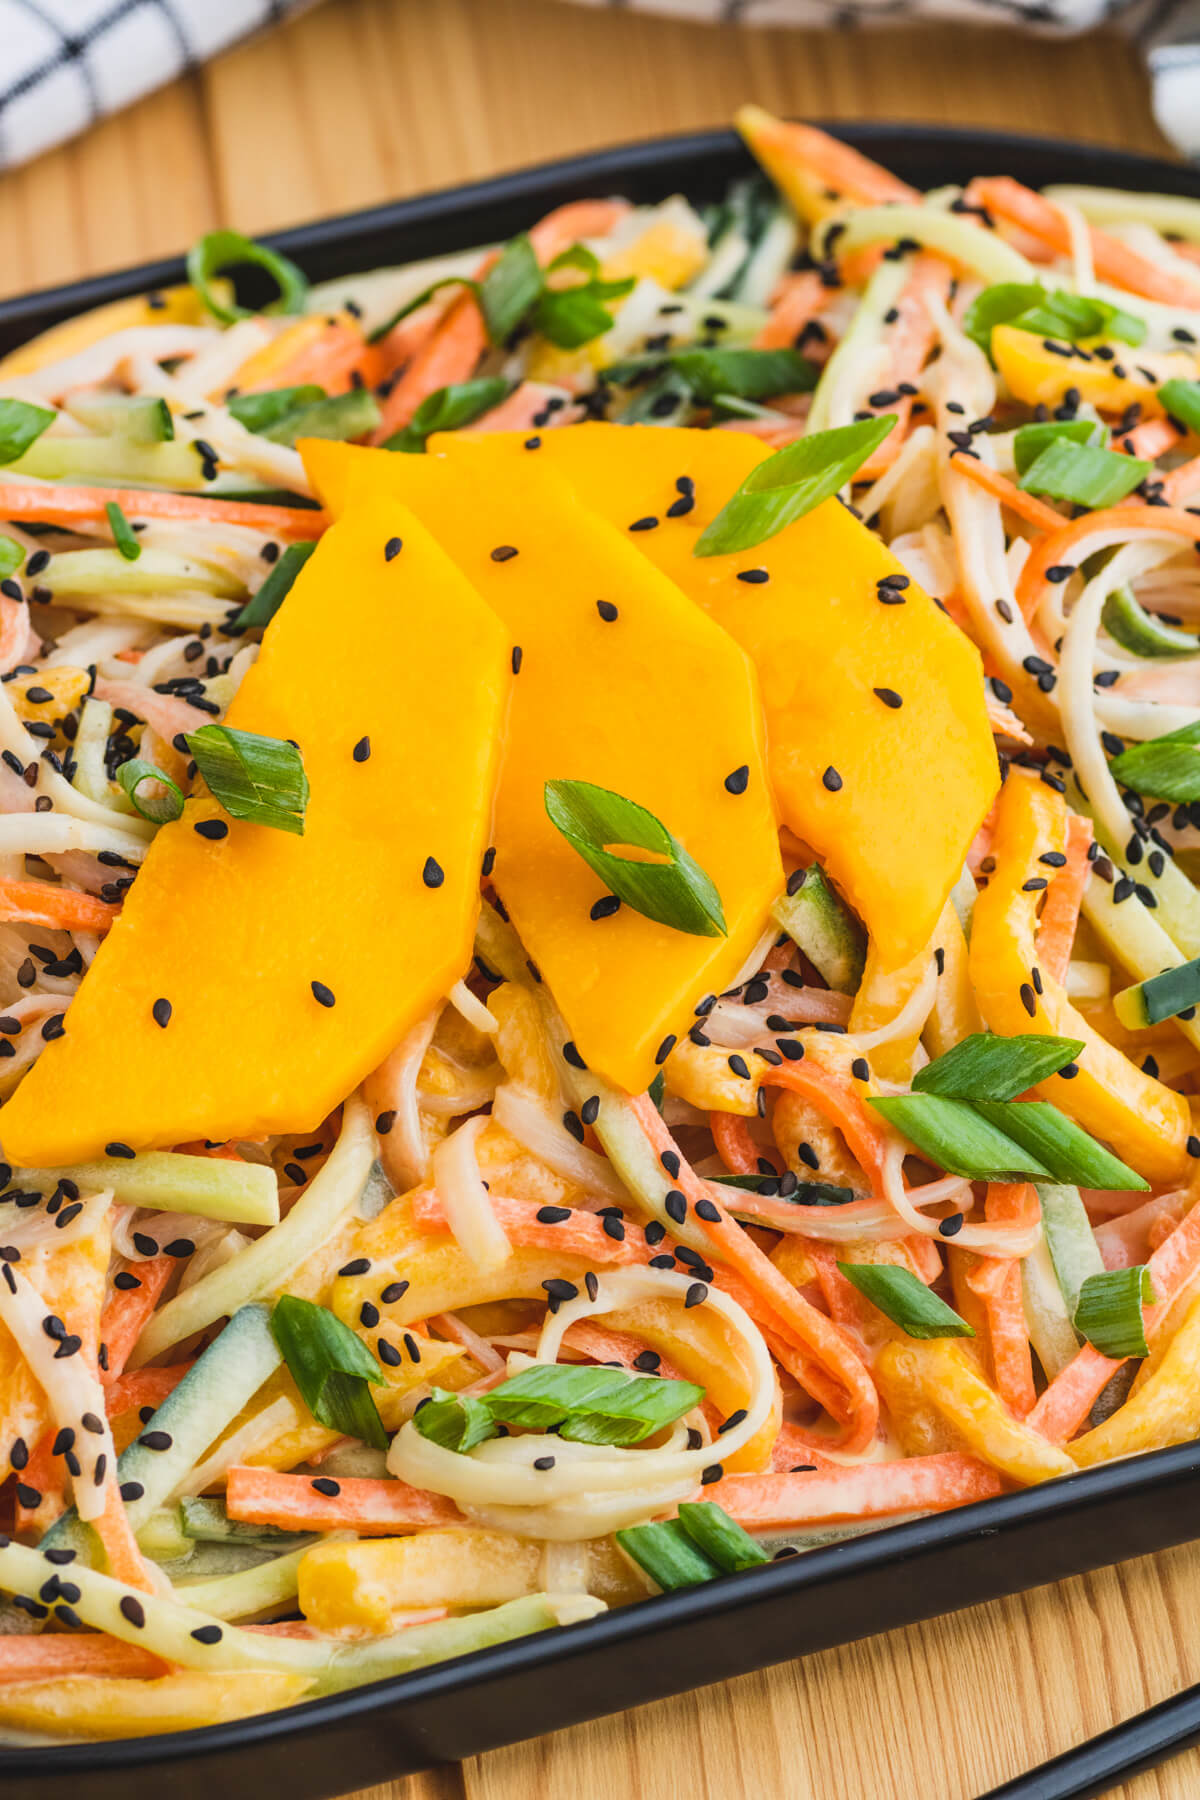 A black platter filled with shredded Kani salad topped with slices of mango, black sesame seeds, and chopped scallions.